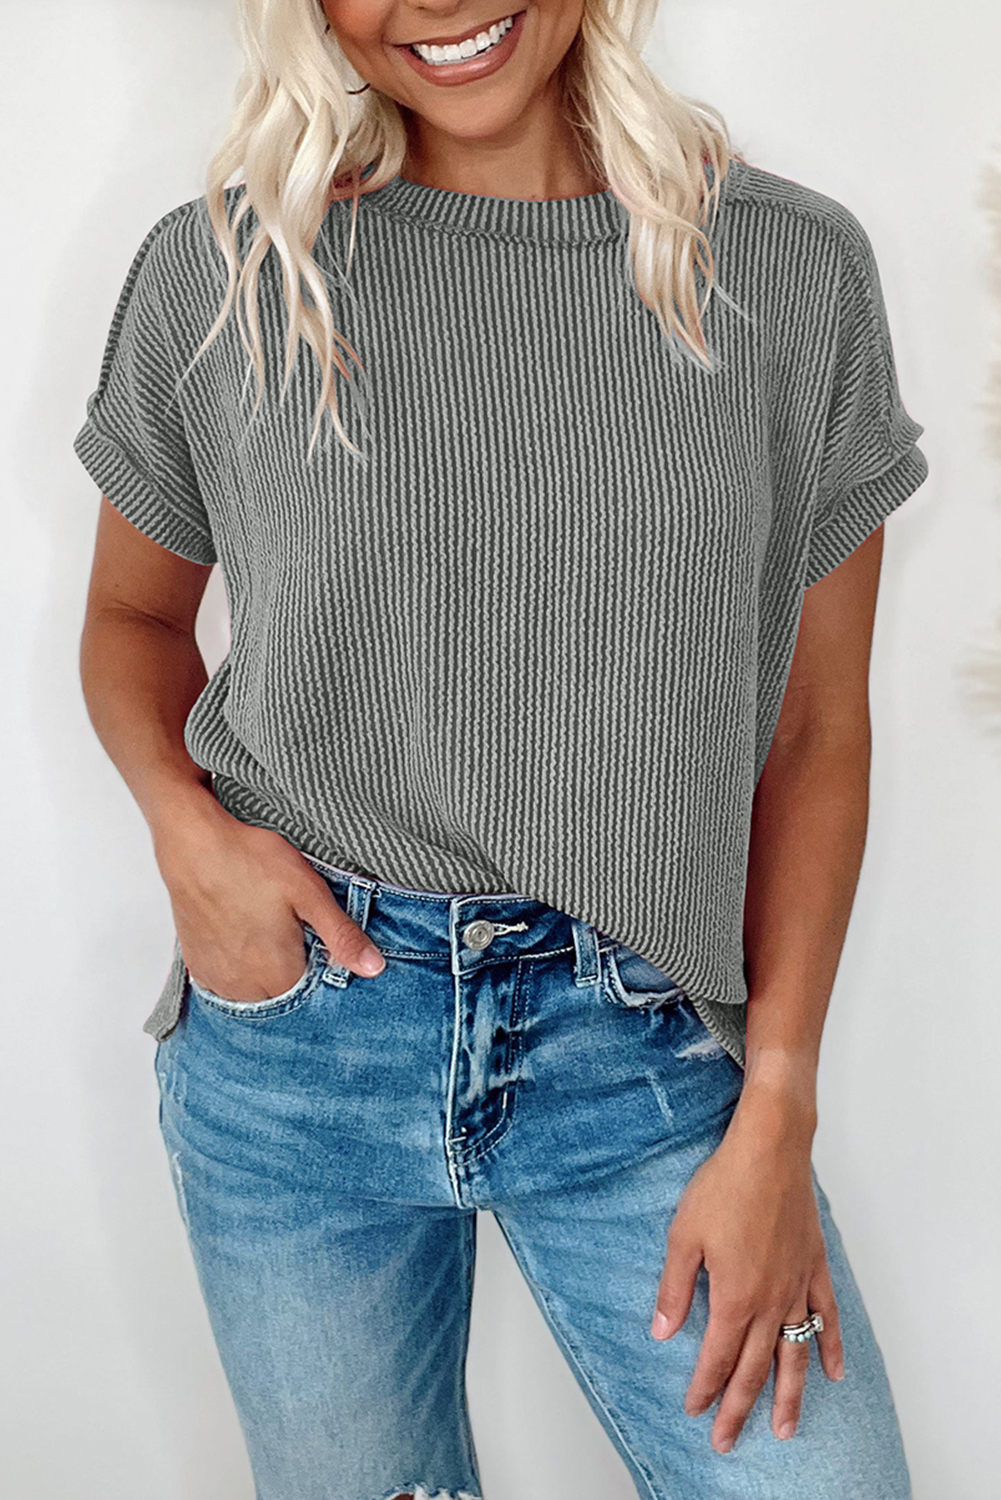 Shewin Wholesale Dropshippers Medium Grey Ribbed Knit Exposed Seam Round Neck T-SHIRT